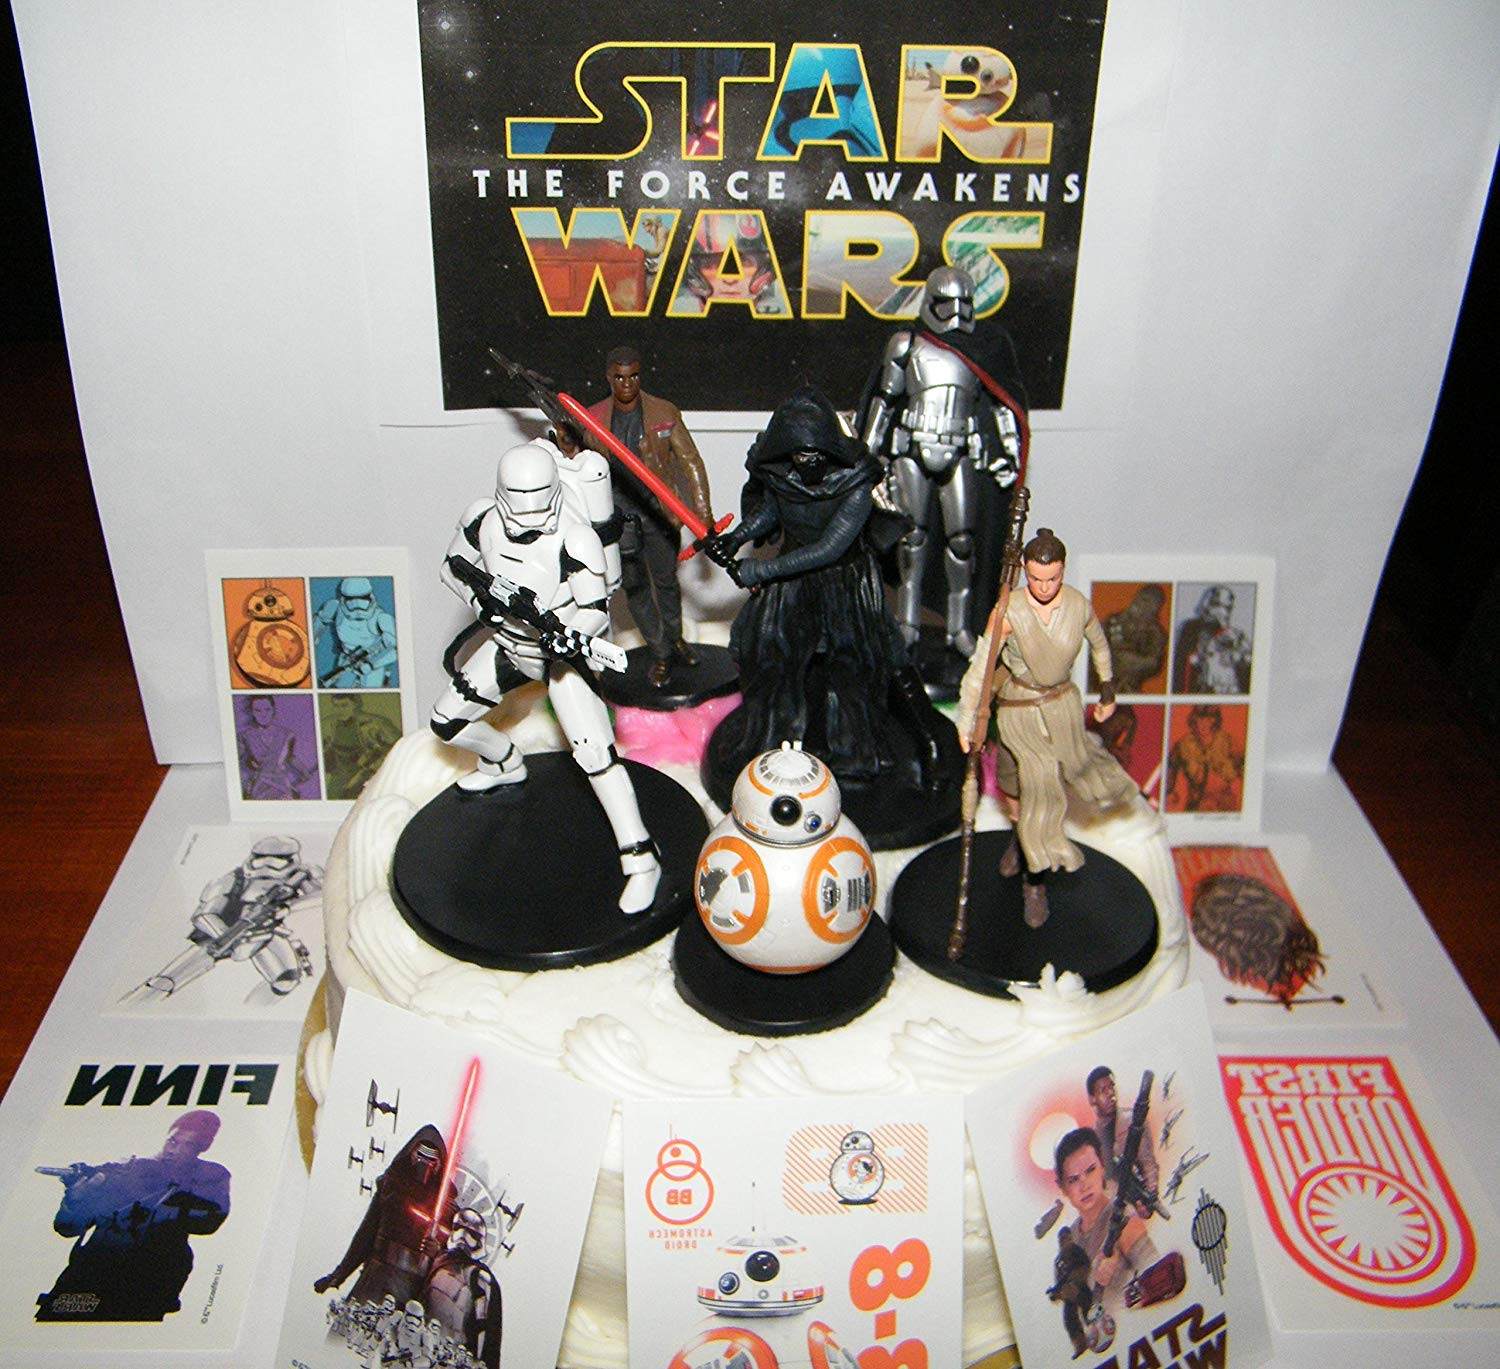 Star Wars Birthday Cake Toppers
 Star Wars Birthday Party Cake Toppers